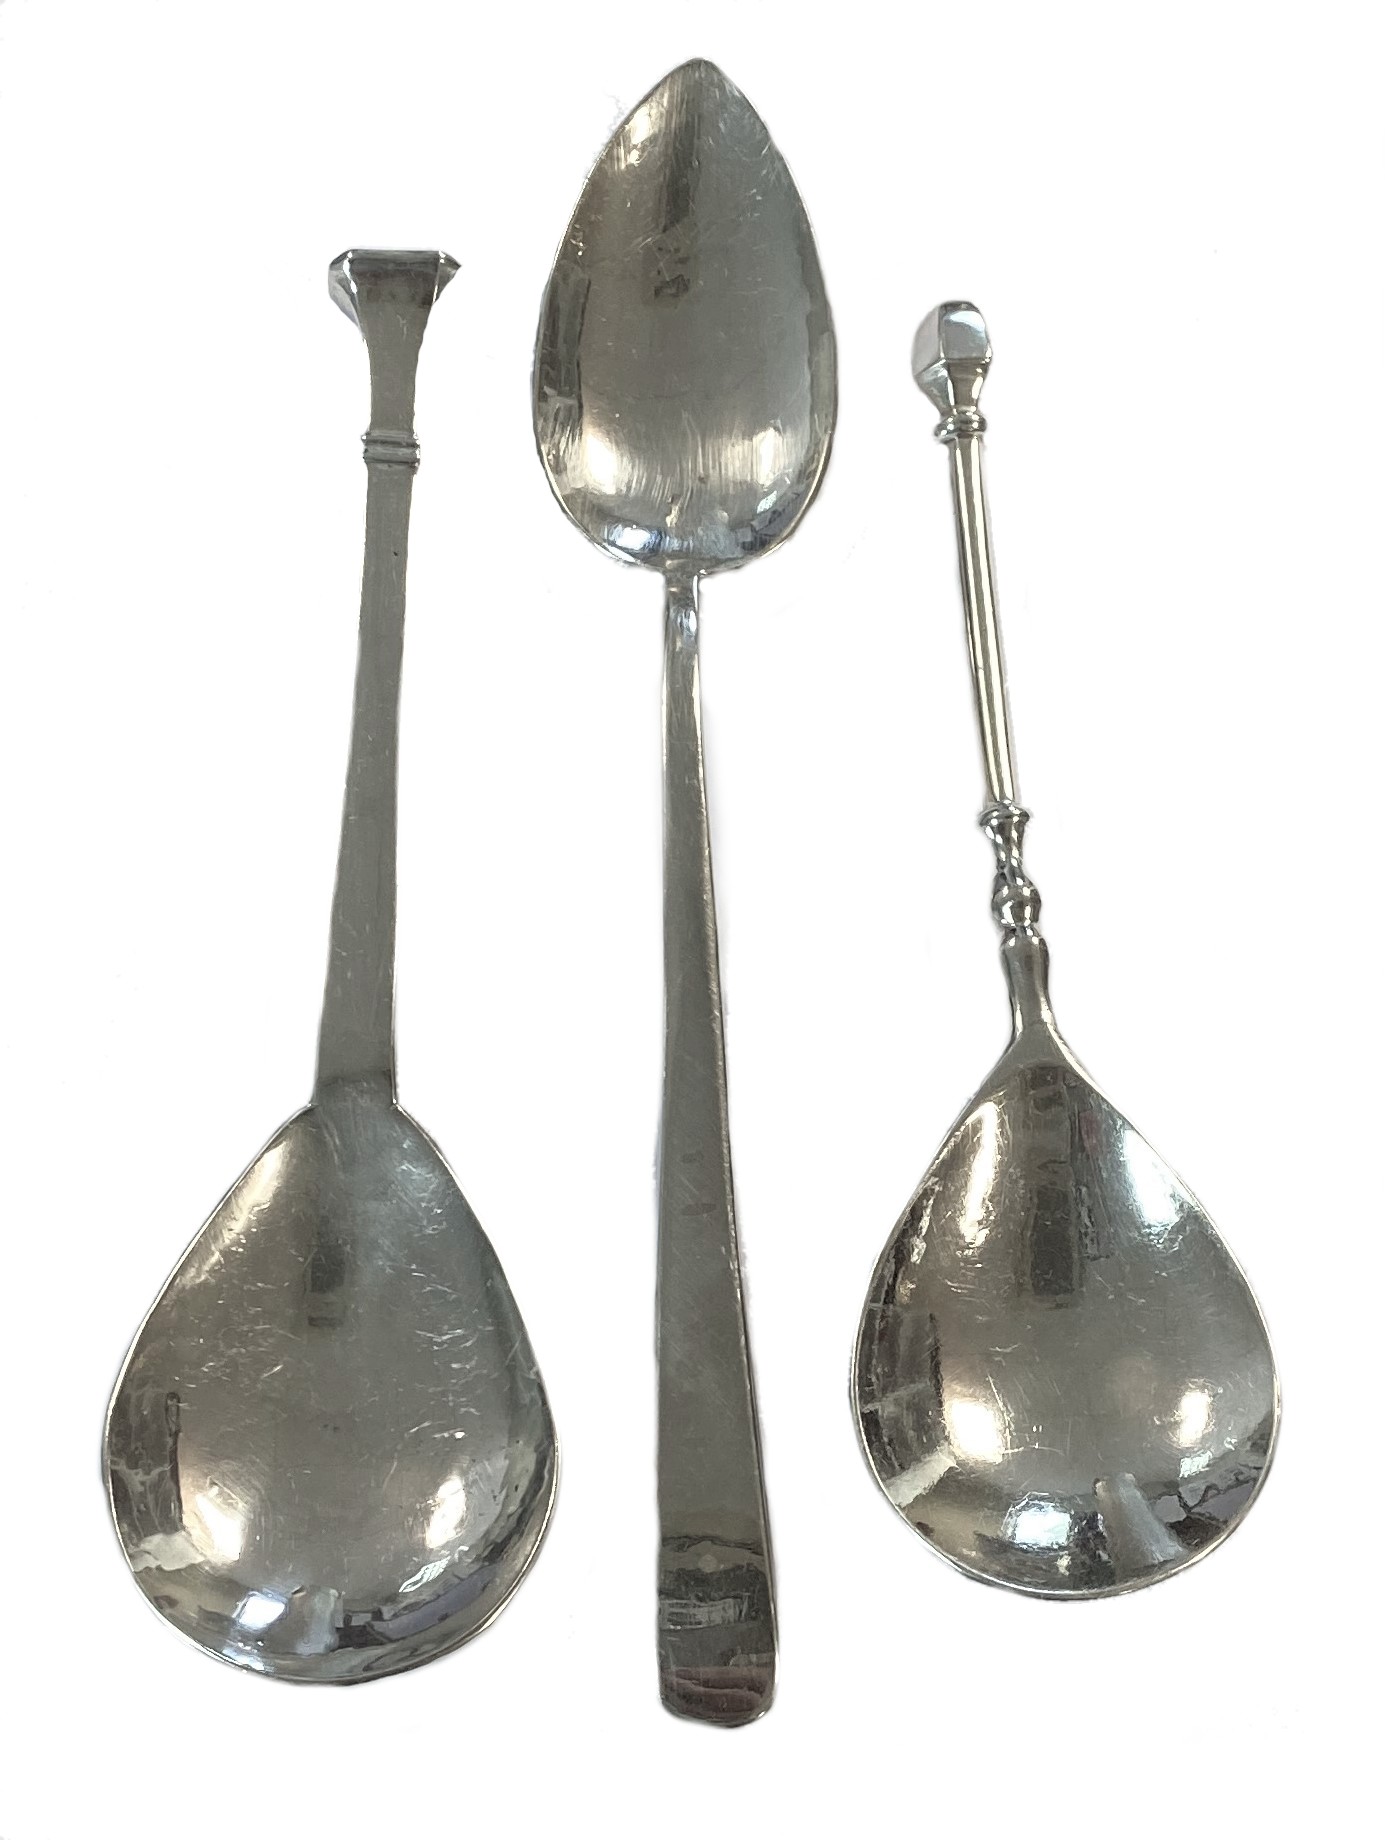 Three 20th century silver conserve spoons, mark of Guild of Handicraft,